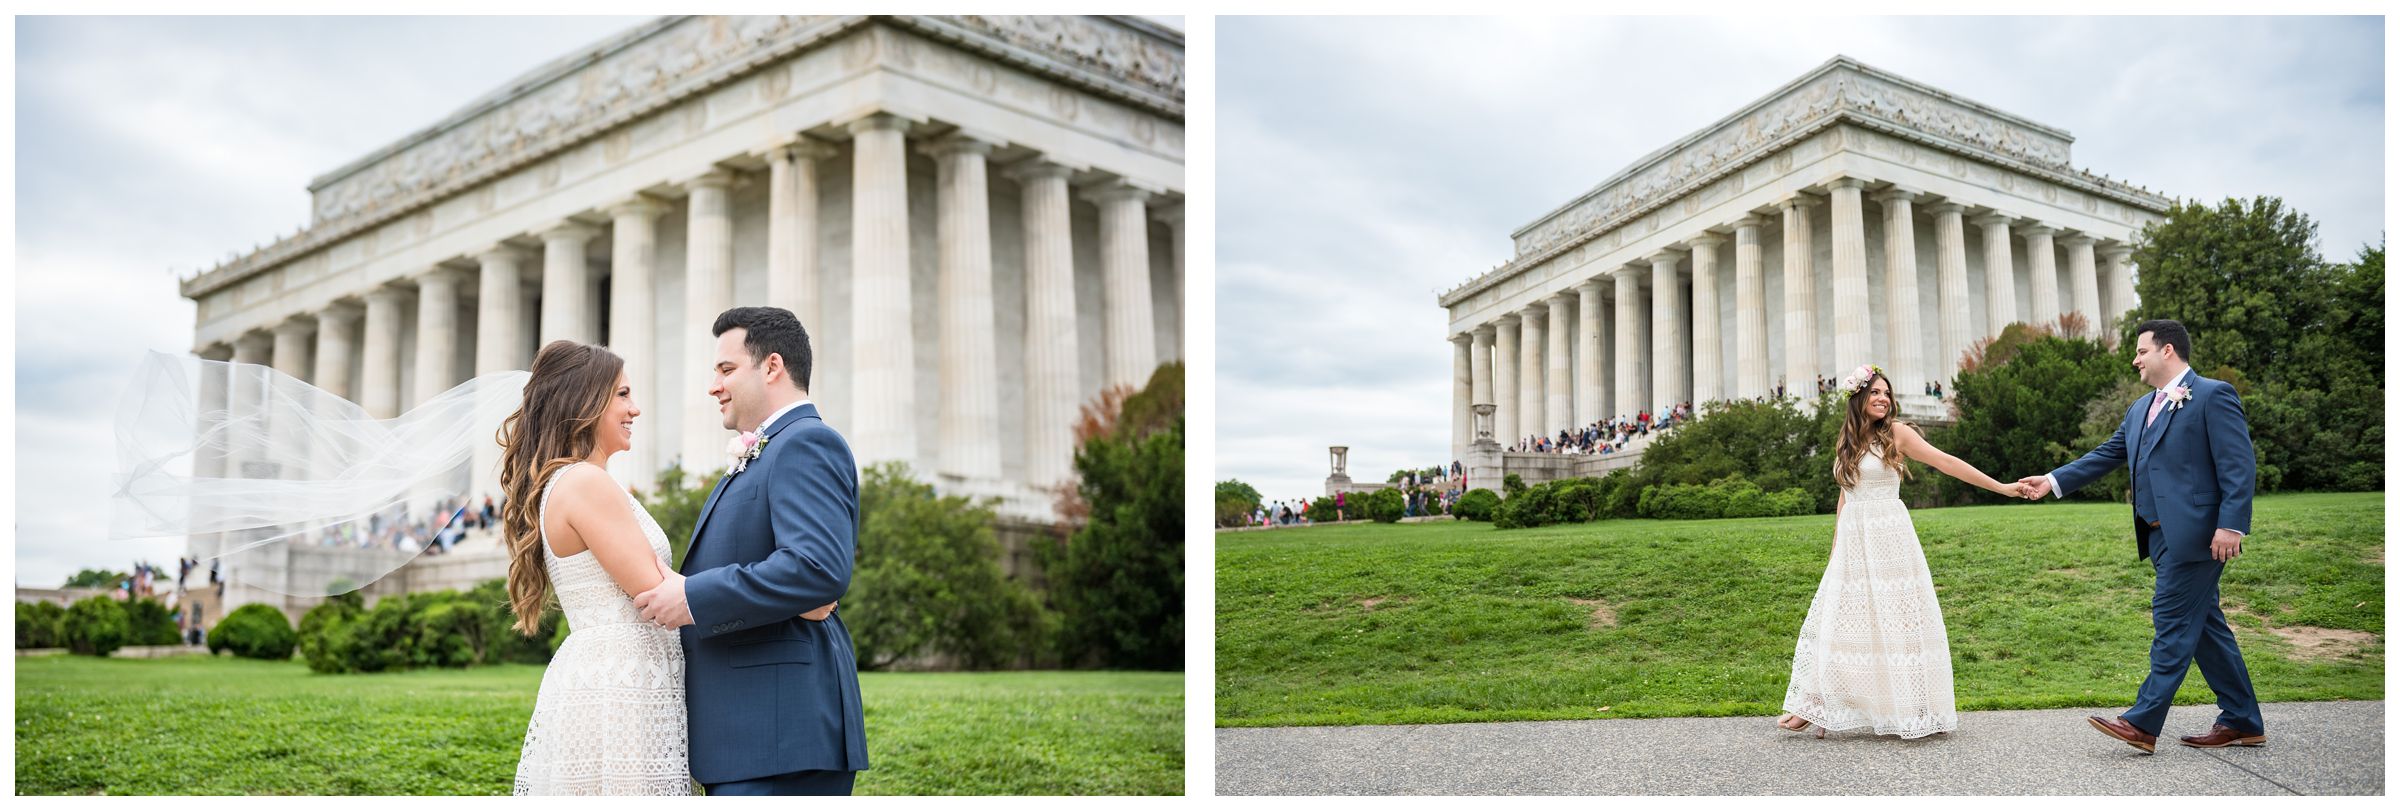 bride and groom in front of Lincoln Memorial during DC monument wedding day in Washington